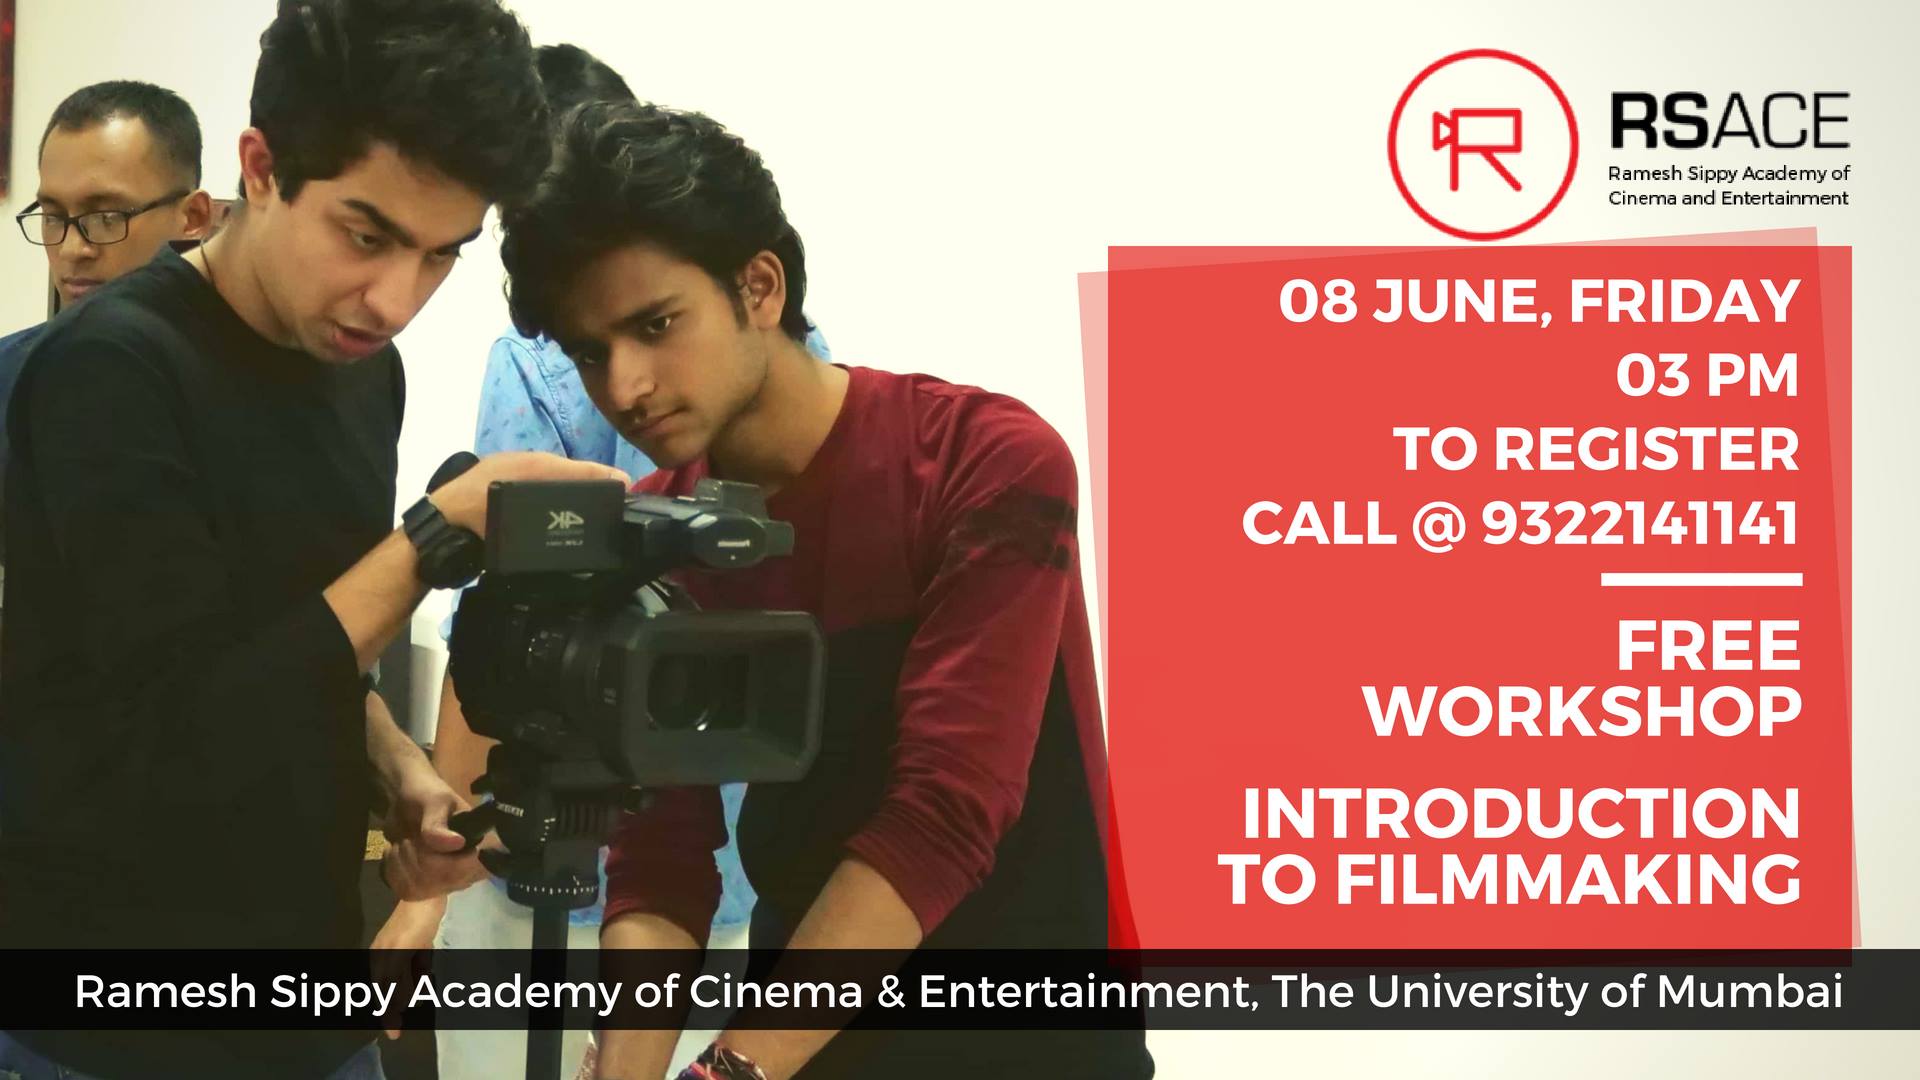 Presents Free Wordshop on Introduction to Filmmaking